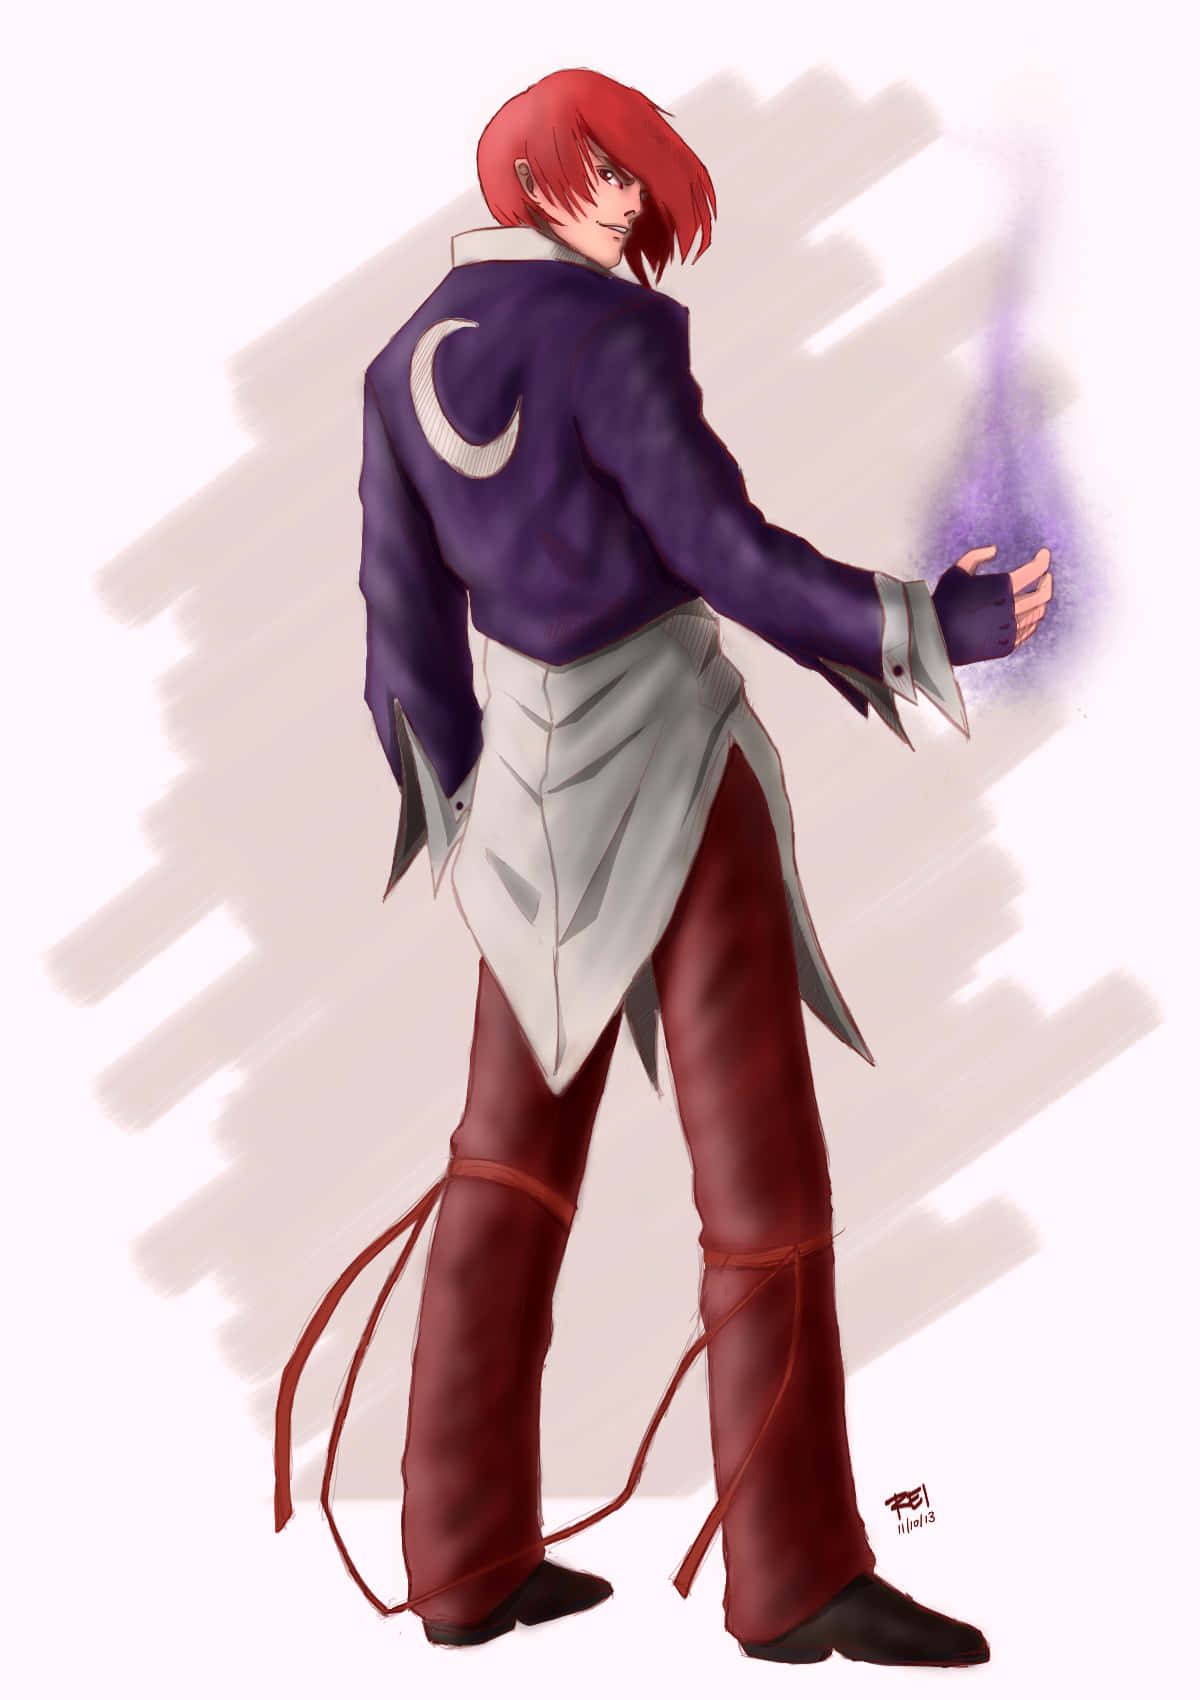 A Drawing Of A Man With Red Hair And Purple Clothes Wallpaper